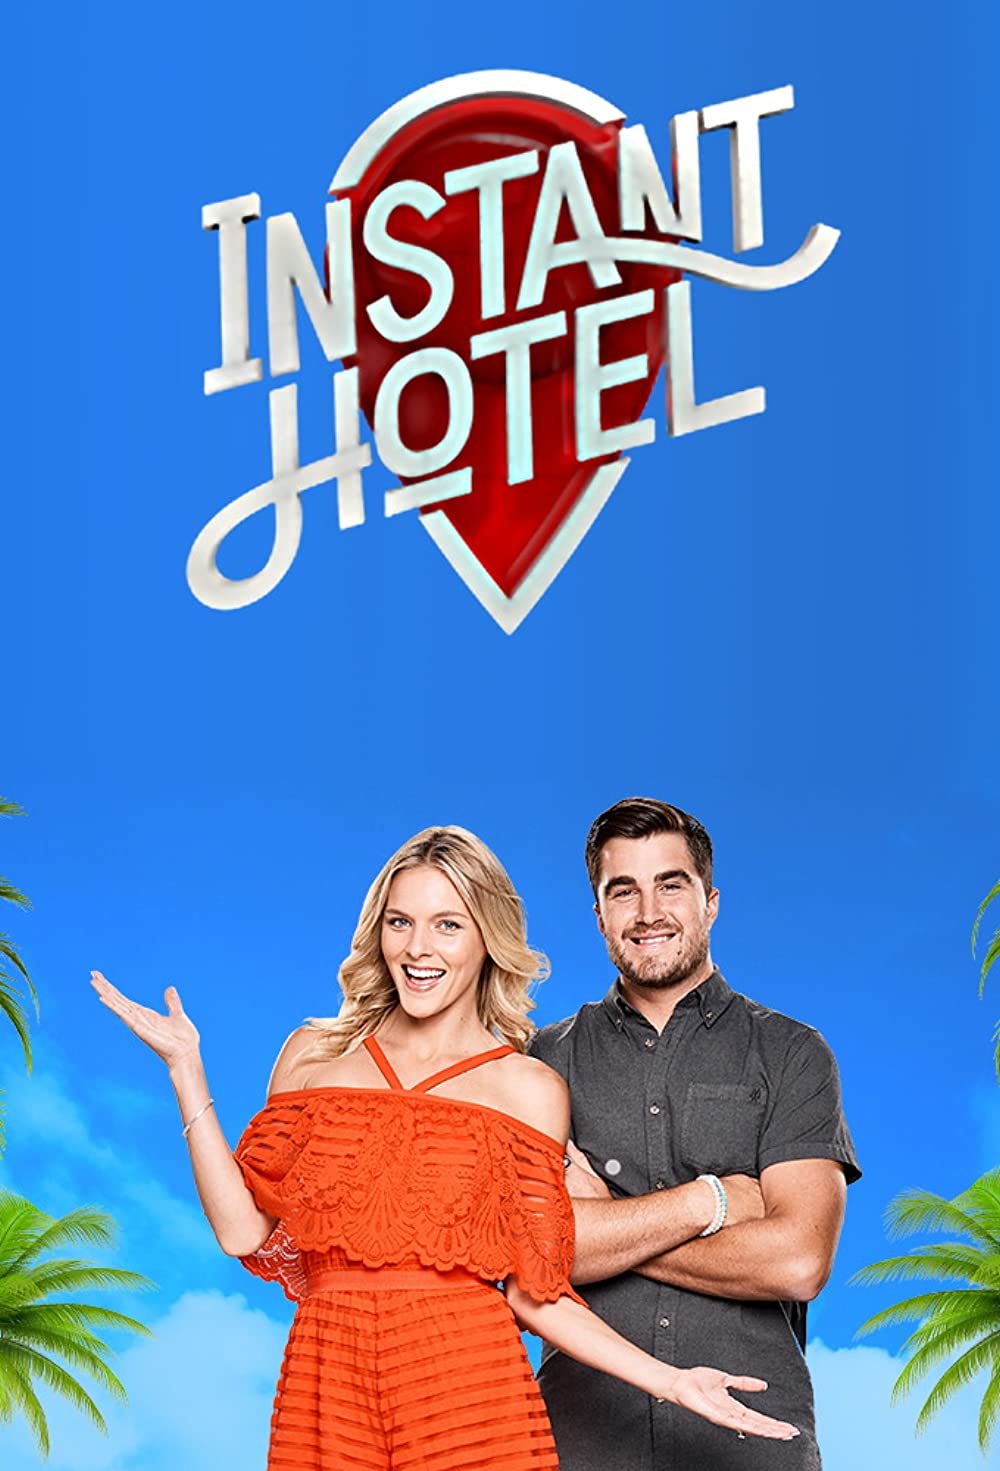 A lady wearing an orange dress and a man wearing a grey shirt in the instant hotel tv show poster